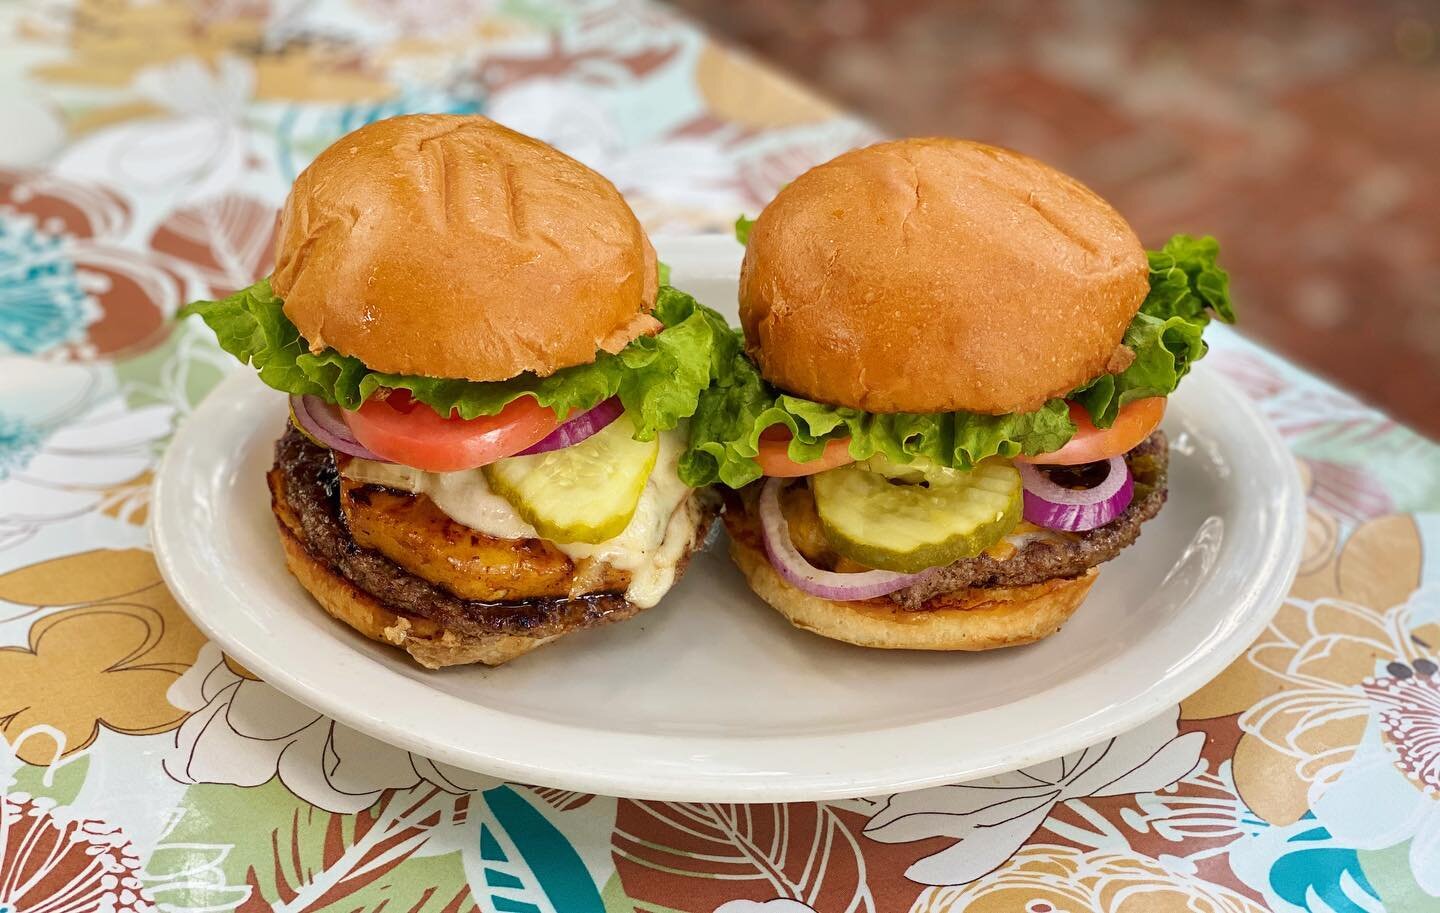 Did you know that Wednesday&rsquo;s are officially Buy One Get One Burger Night at Magnolia Cafe? 🍔🍔🍔 We&rsquo;re now proudly serving Texas sourced, 44Farms burger patties! 

Offer valid for dine-in orders from 3 - 10pm!